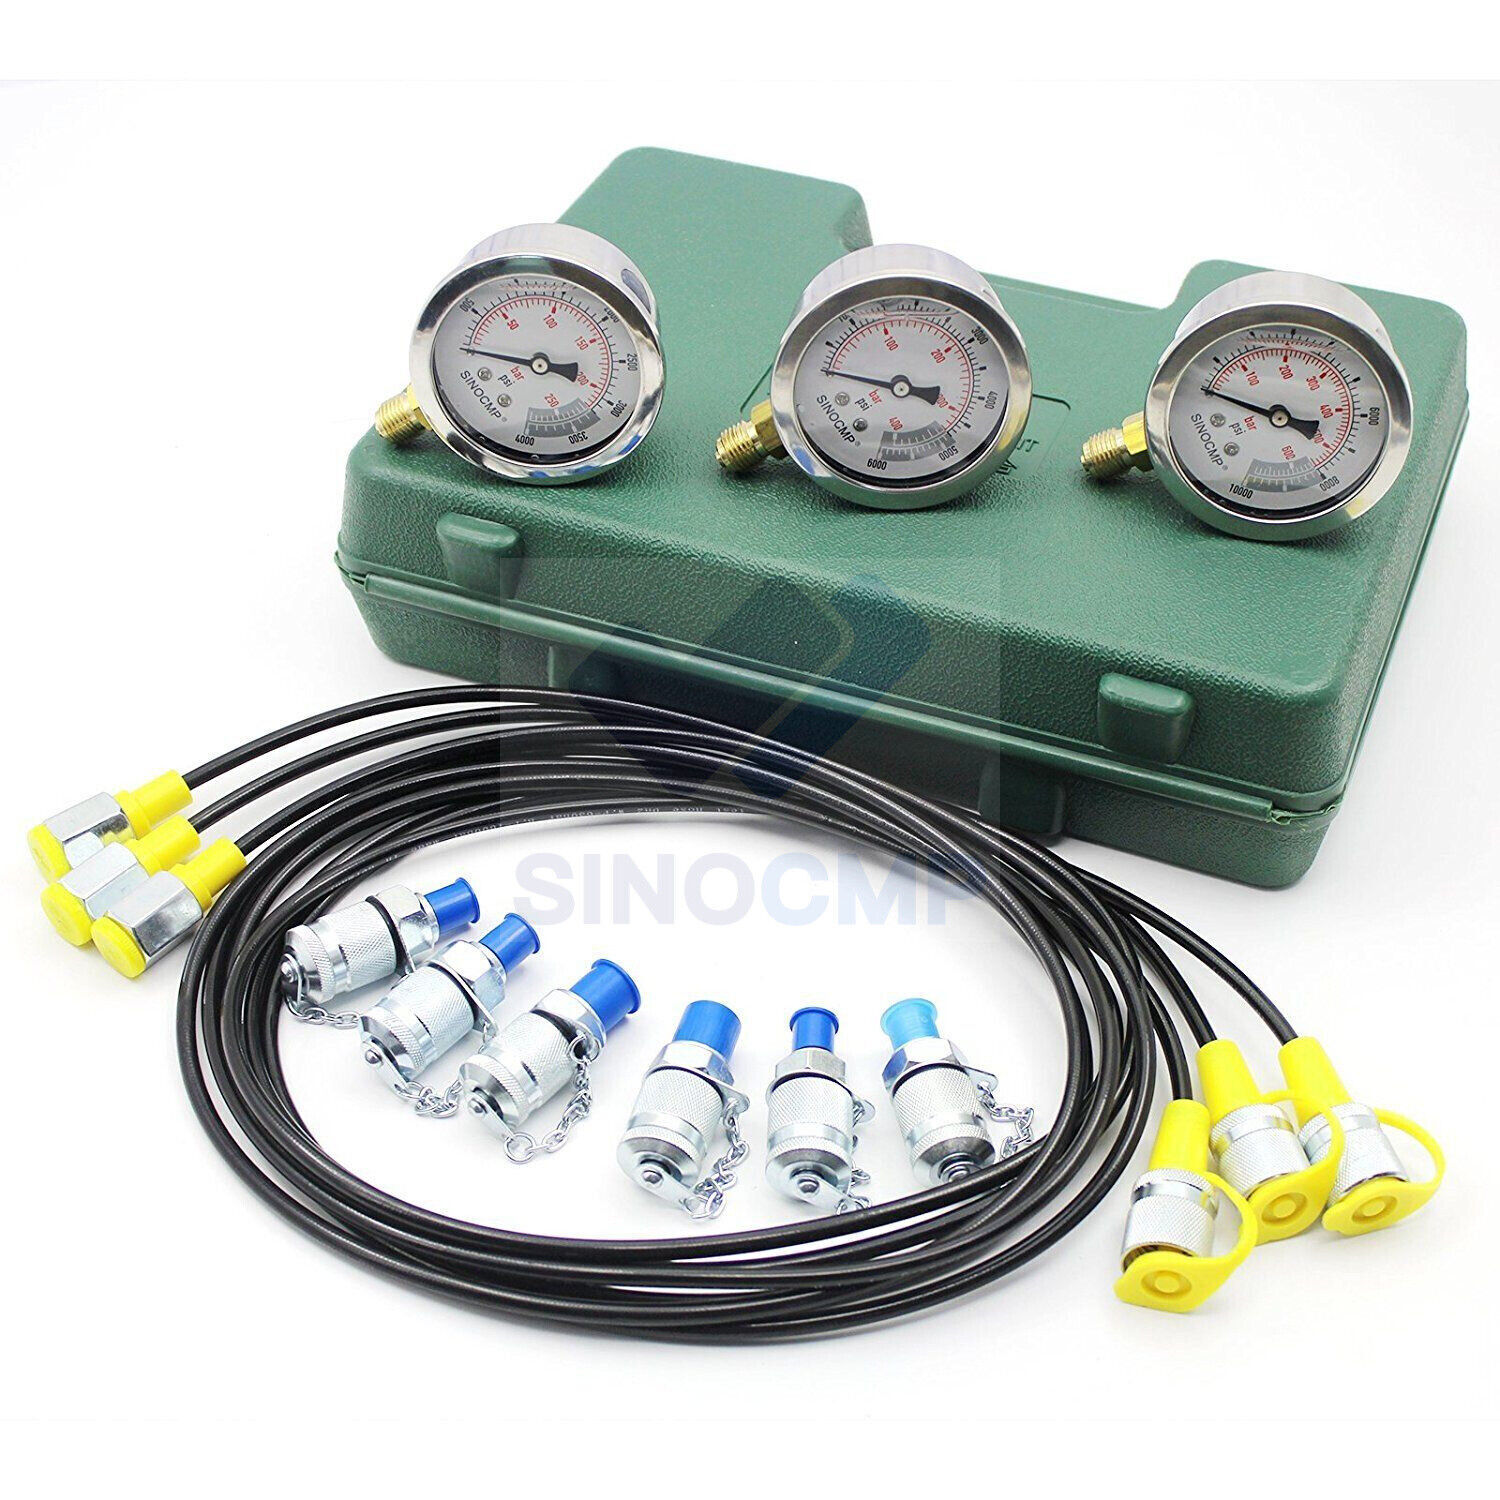 Hydraulic Pressure Test, Test Coupling Gauge for Most Excavator New